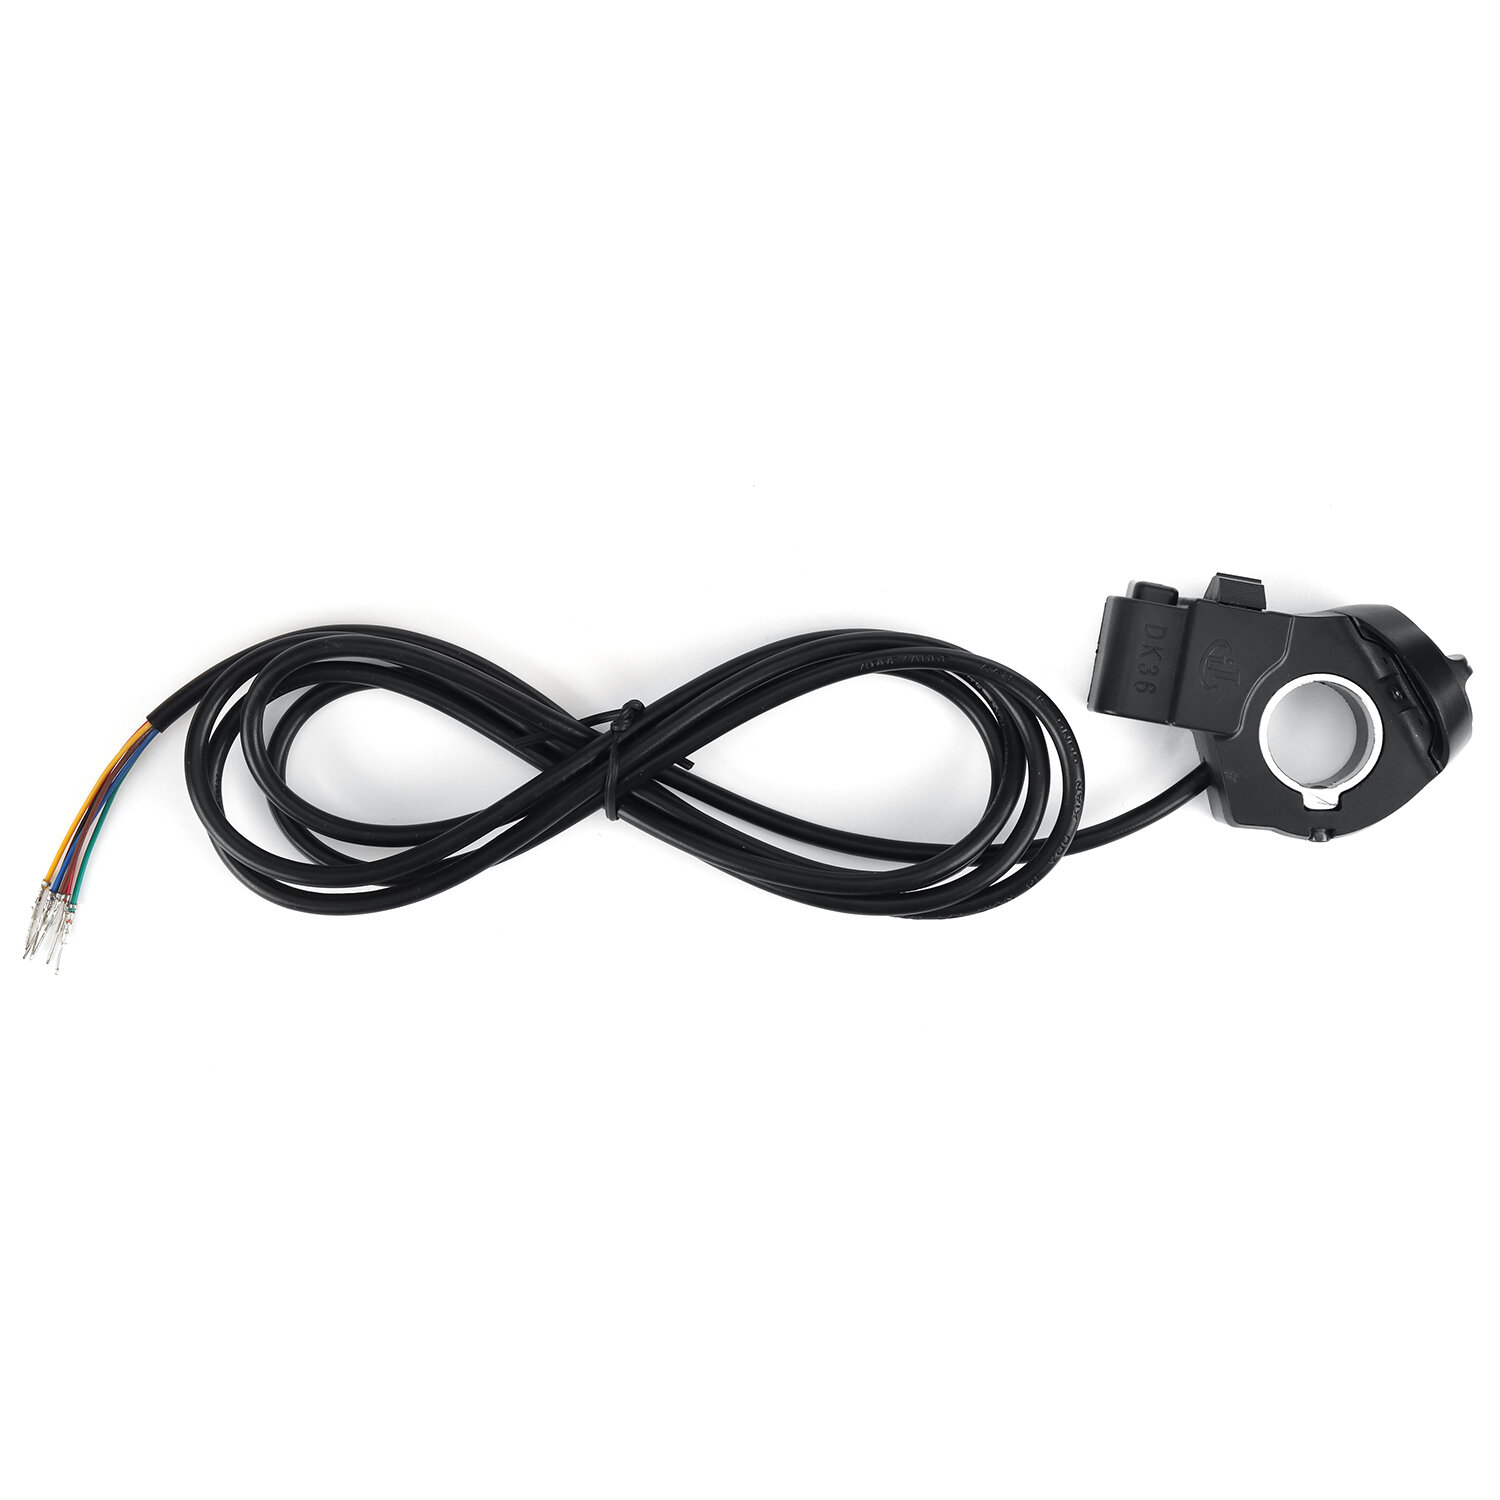 

LAOTIE Headlight Turn Signal And Horn 3 In 1 Switch For ES19 TI30 ES18P T30 SR10 ES18 Lite L8S PRO ES10P L6 Pro ANGWATT